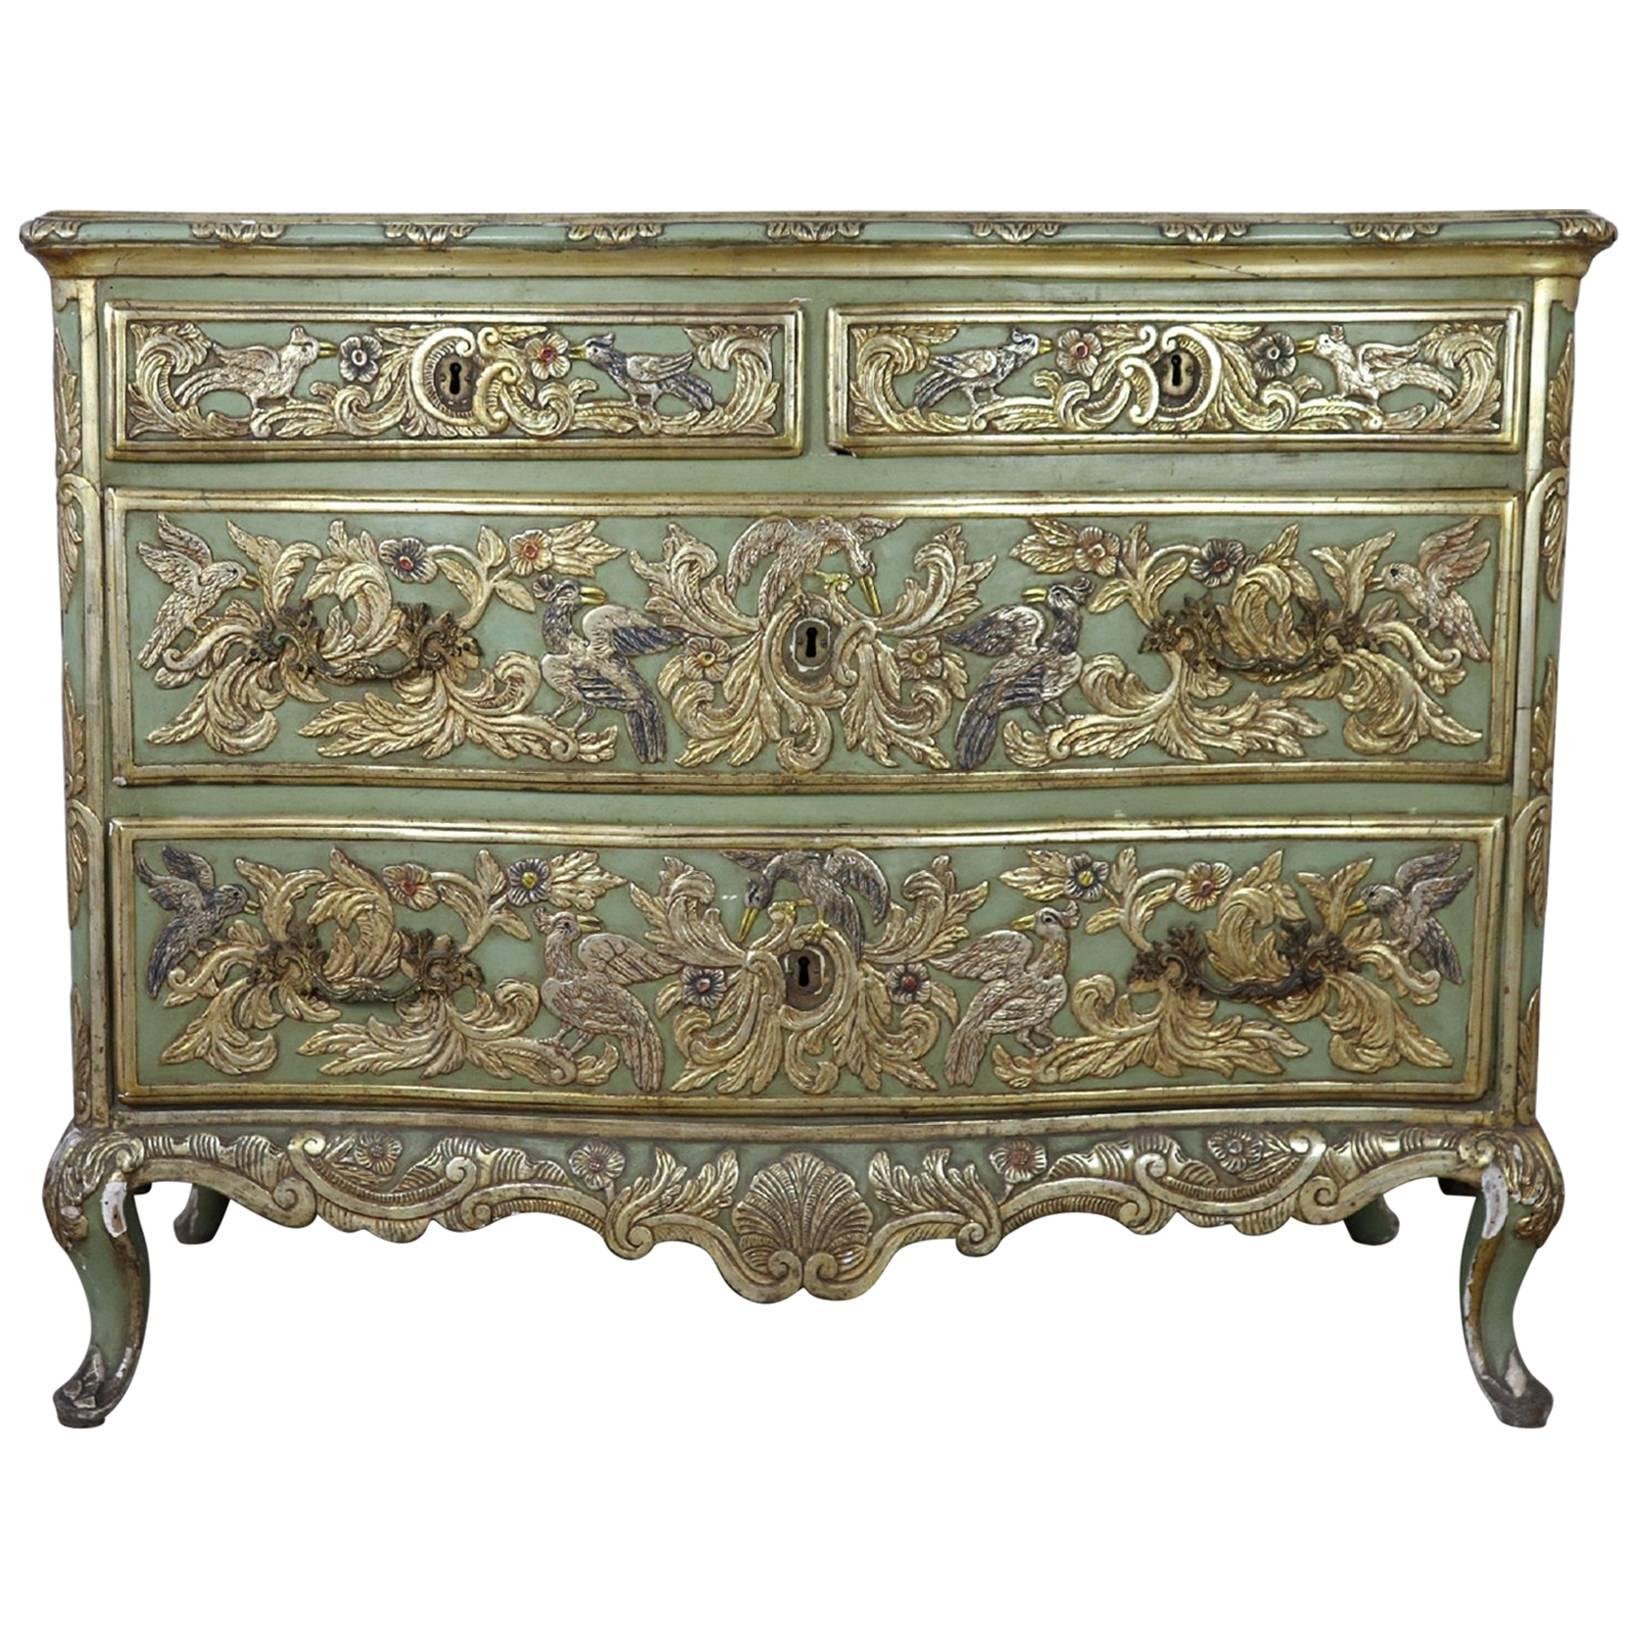 19th Century French Louis XV Style Carved Lacquered and Gilded Chest of Drawers